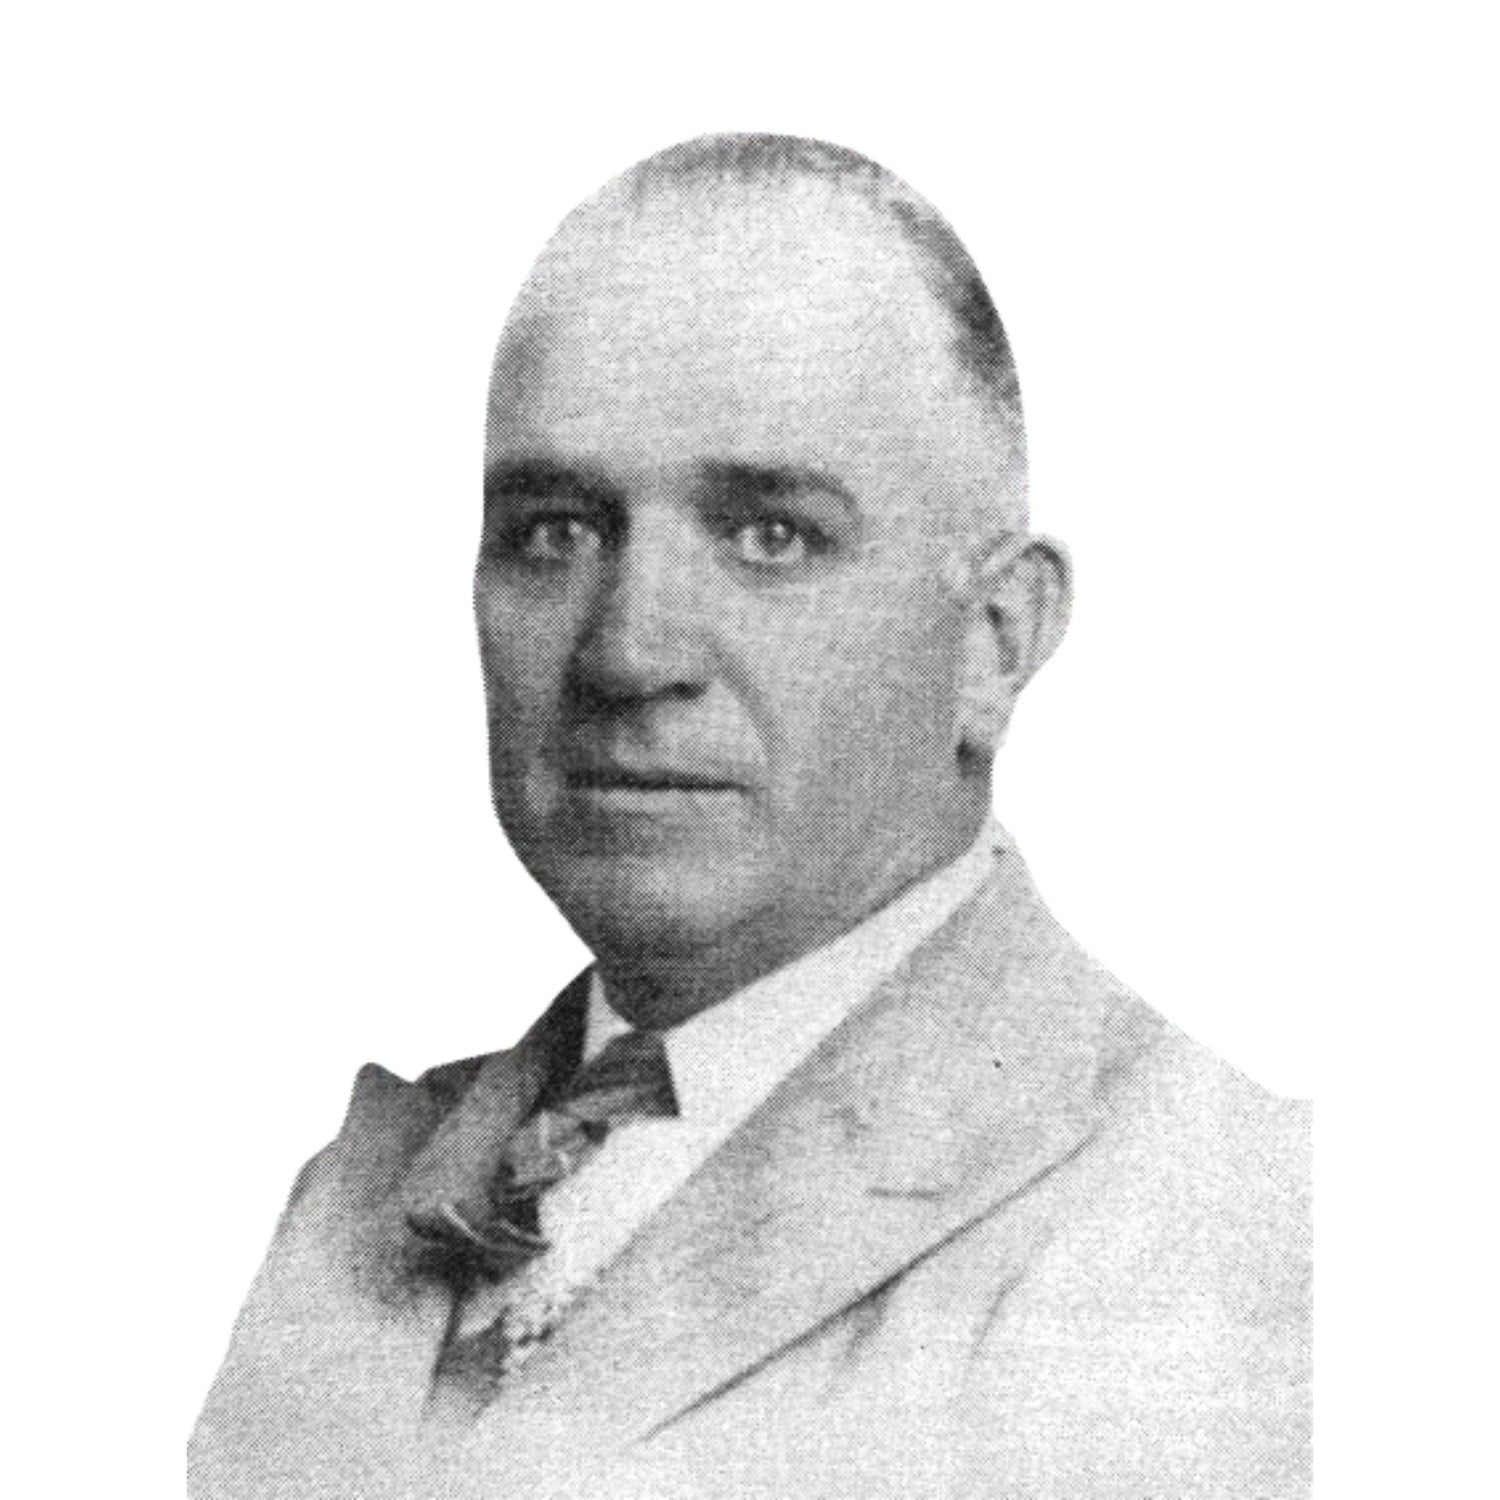 A historical black and white portrait of the founder of Moorcroft Foods and Fenner’s, a man in a formal suit and tie. Accompanying text celebrates the return of these well-established South African brands to the UK market, noting the pride in bringing their heritage and expertise to British consumers